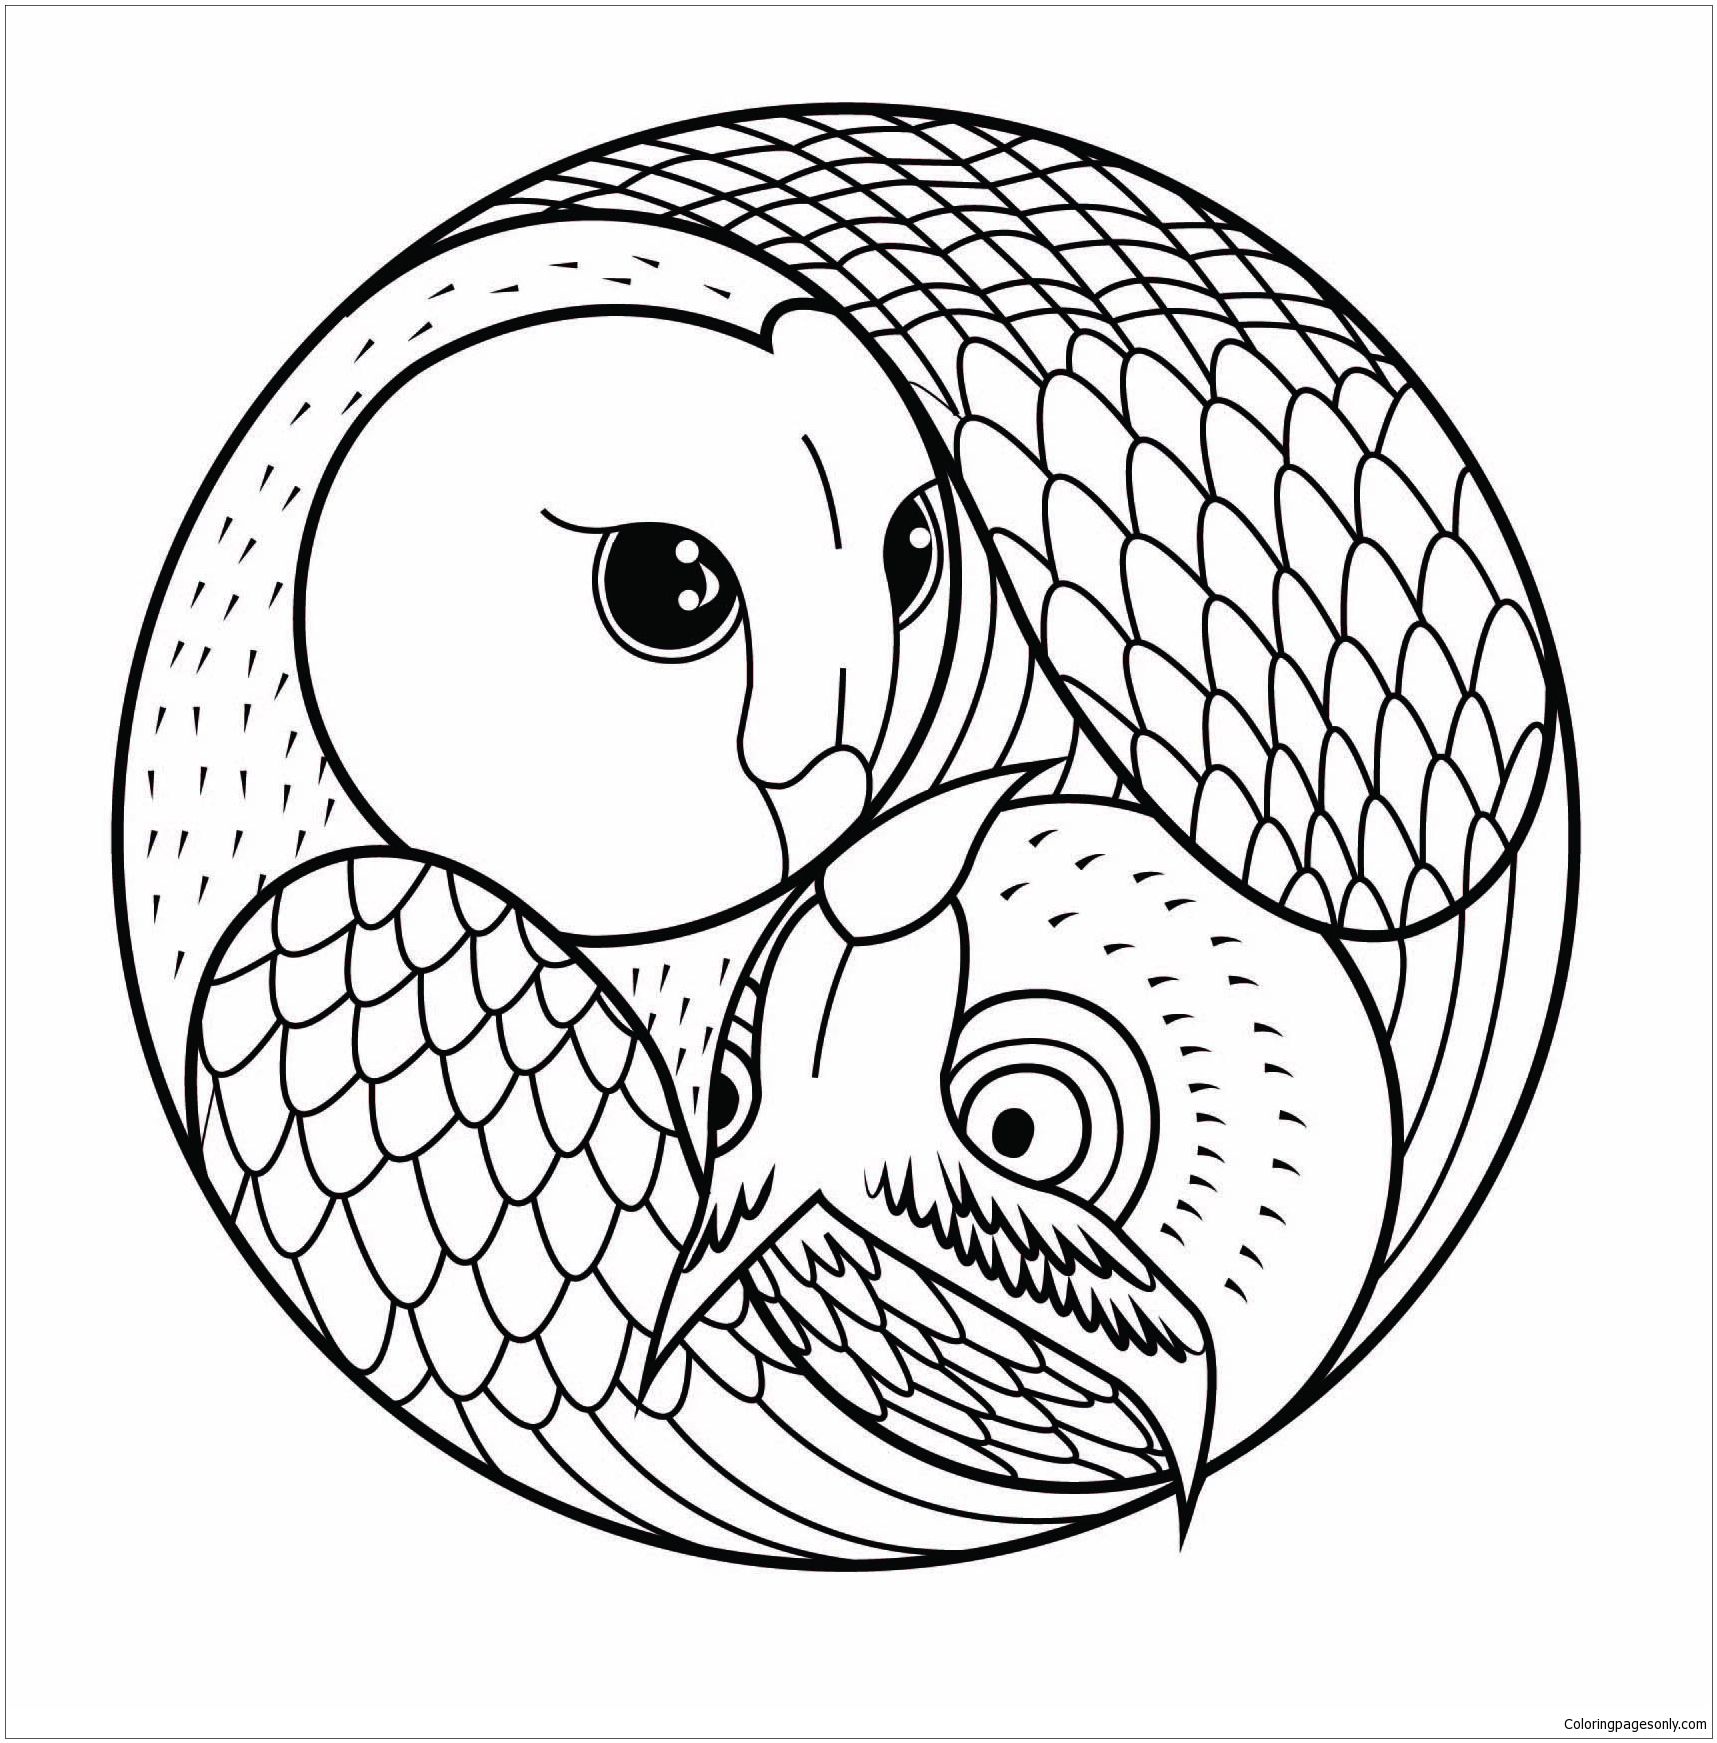 Mandala With 2 Owl Heads Coloring Pages